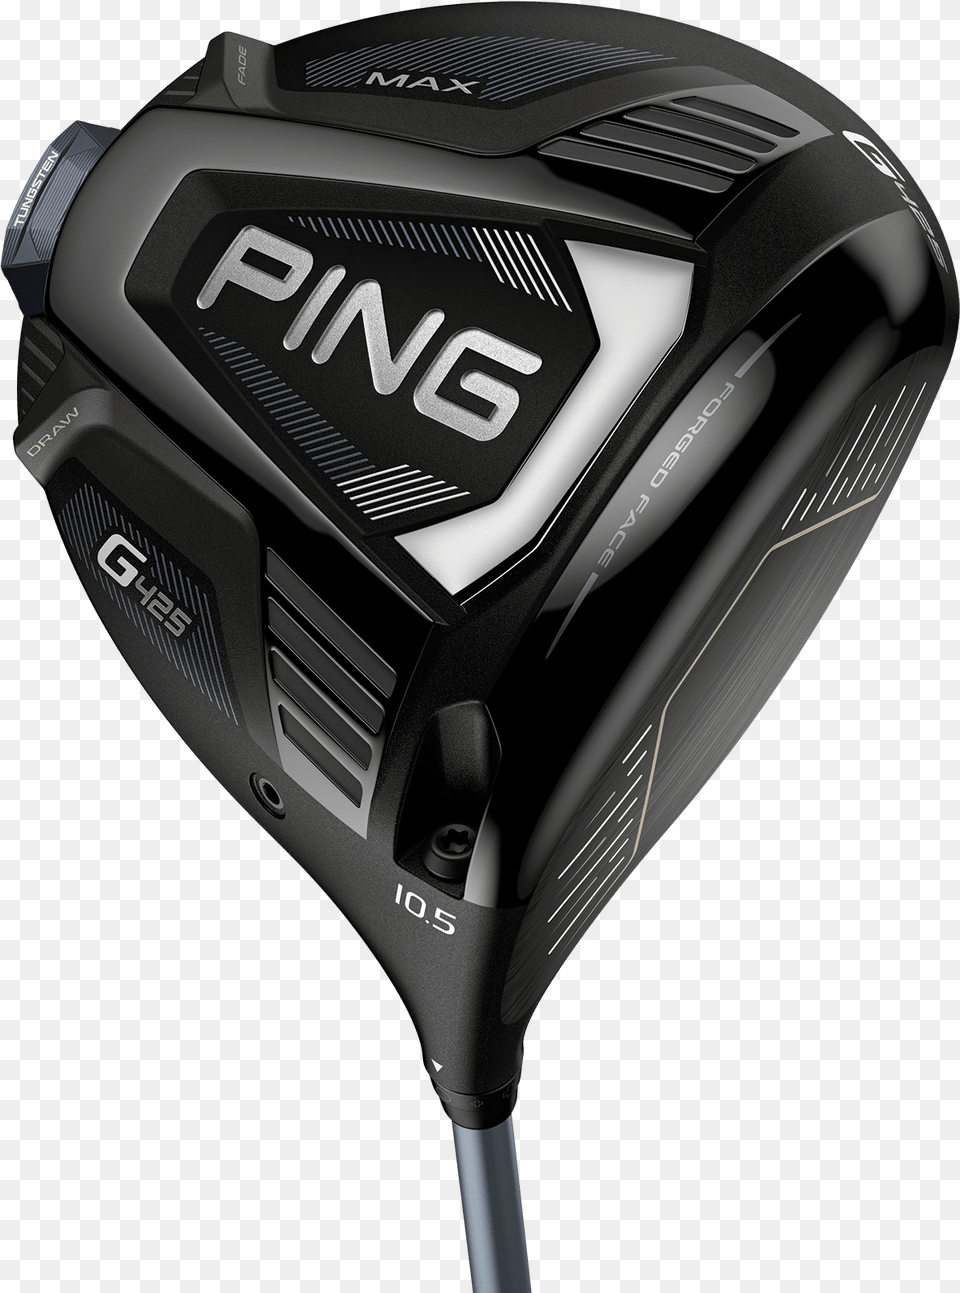 Ping Pre Owned Putters Ping G425 Max Driver, Golf, Golf Club, Sport, Putter Free Png